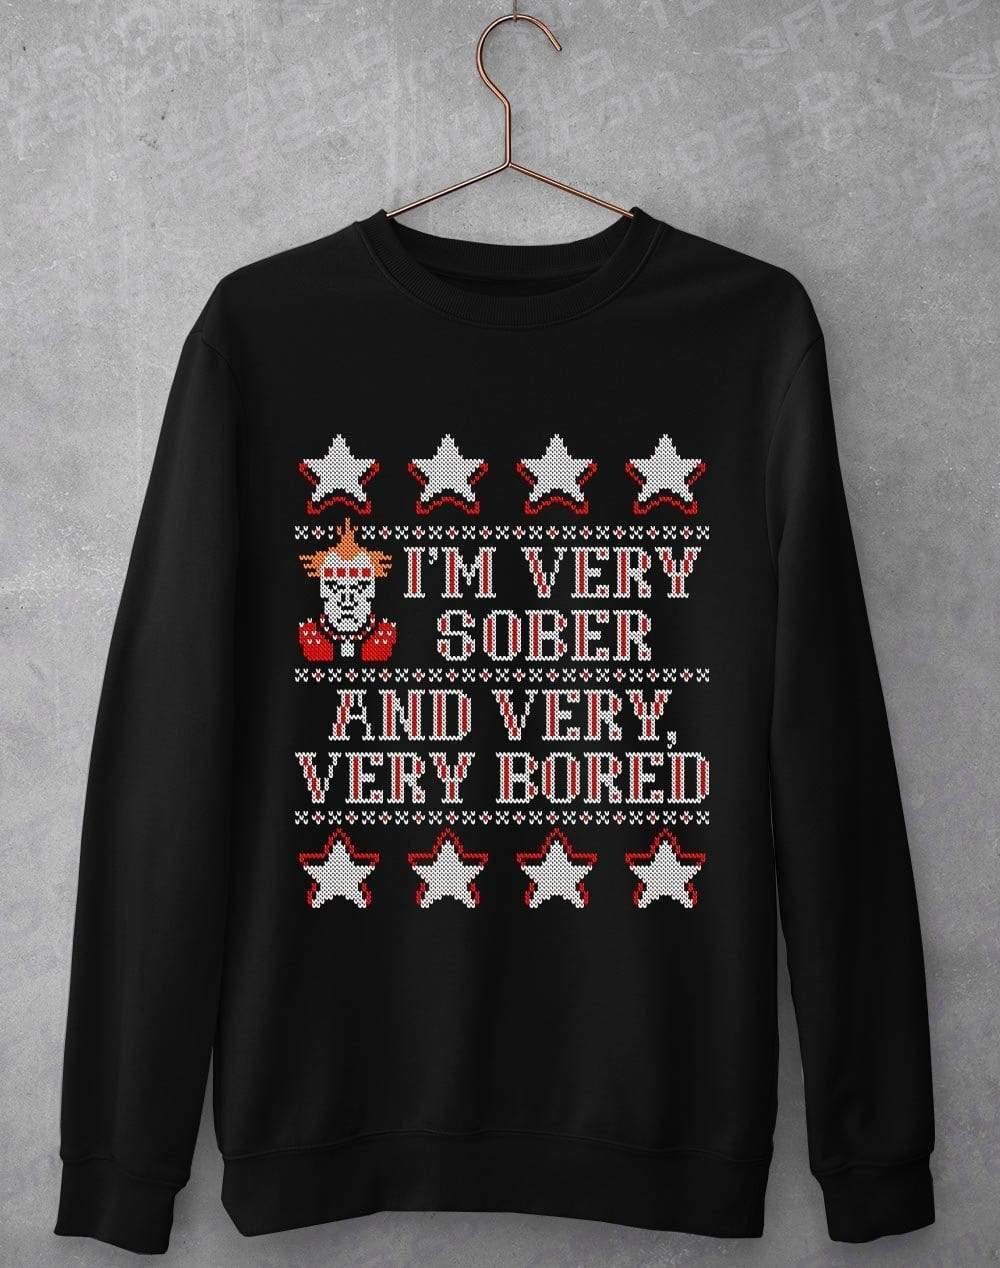 Im Very Sober and Very Very Bored Festive Knitted-Look Sweatshirt S / Black  - Off World Tees